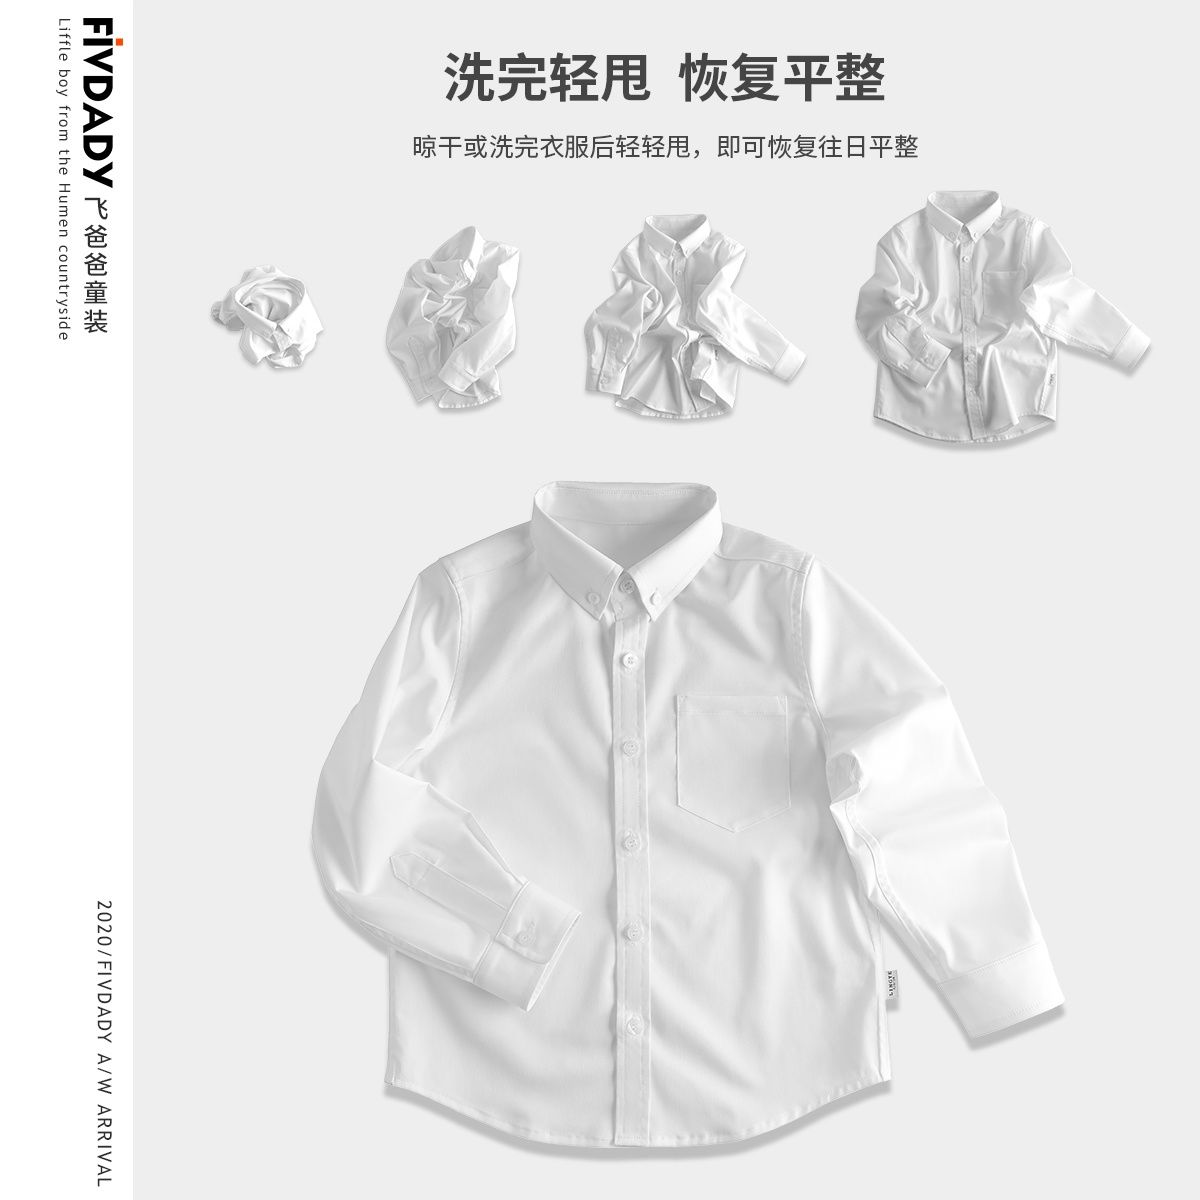 Spring and autumn new non-ironing children's long-sleeved white shirt girls' shirt lace princess collar primary school students school uniform performance clothing